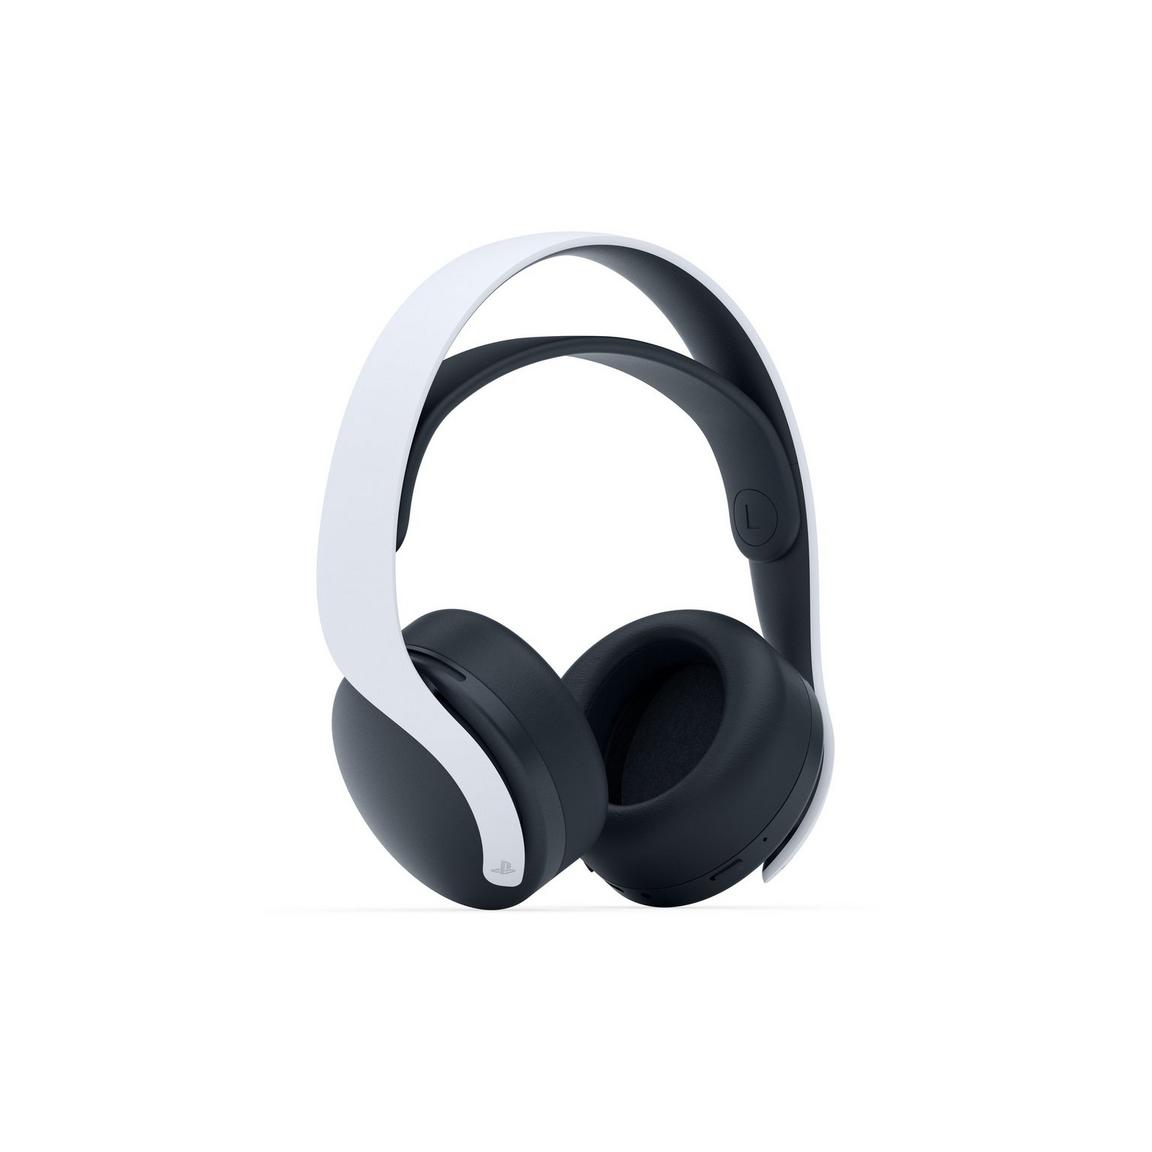 Sony PULSE 3D Wireless Gaming Headset for PlayStation 5, Whiteblack